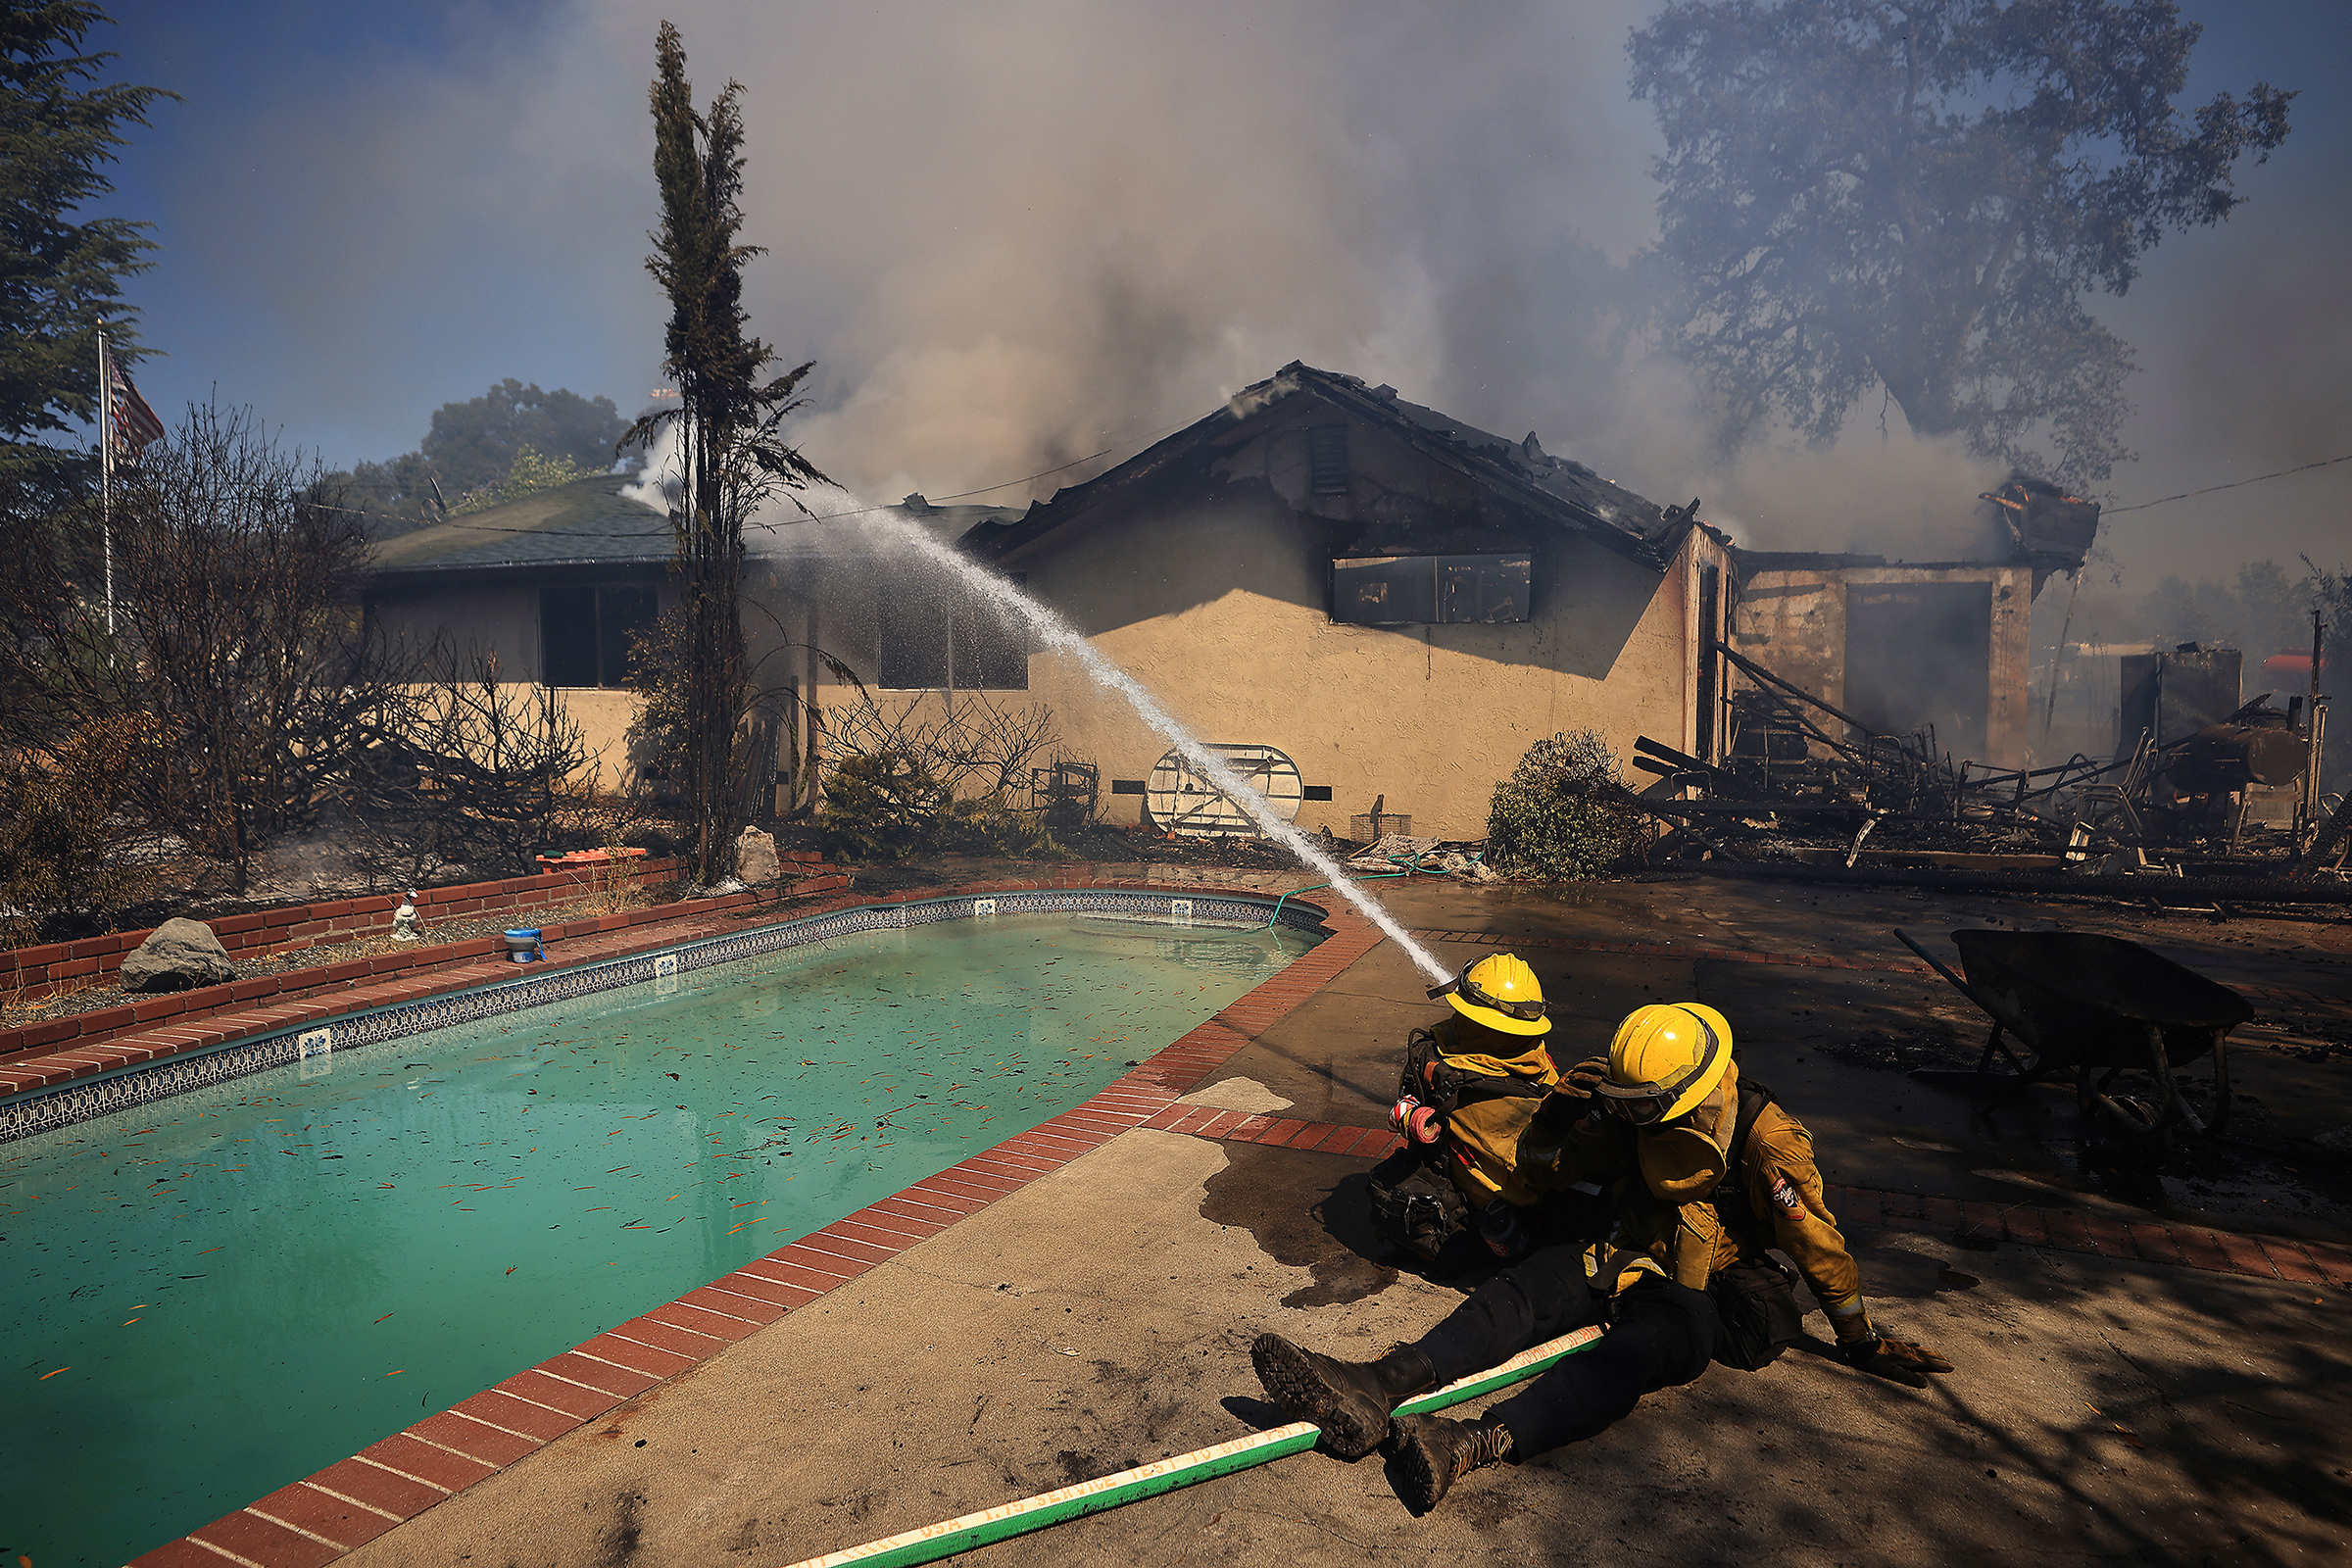 Firefighters take a defensive stand against a home burning in Redwood Valley, Calif., ignited by an 80 acre wind whipped brush fire fed by tinder dry conditions on July 7. (Kent Porter—The Press Democrat/AP)